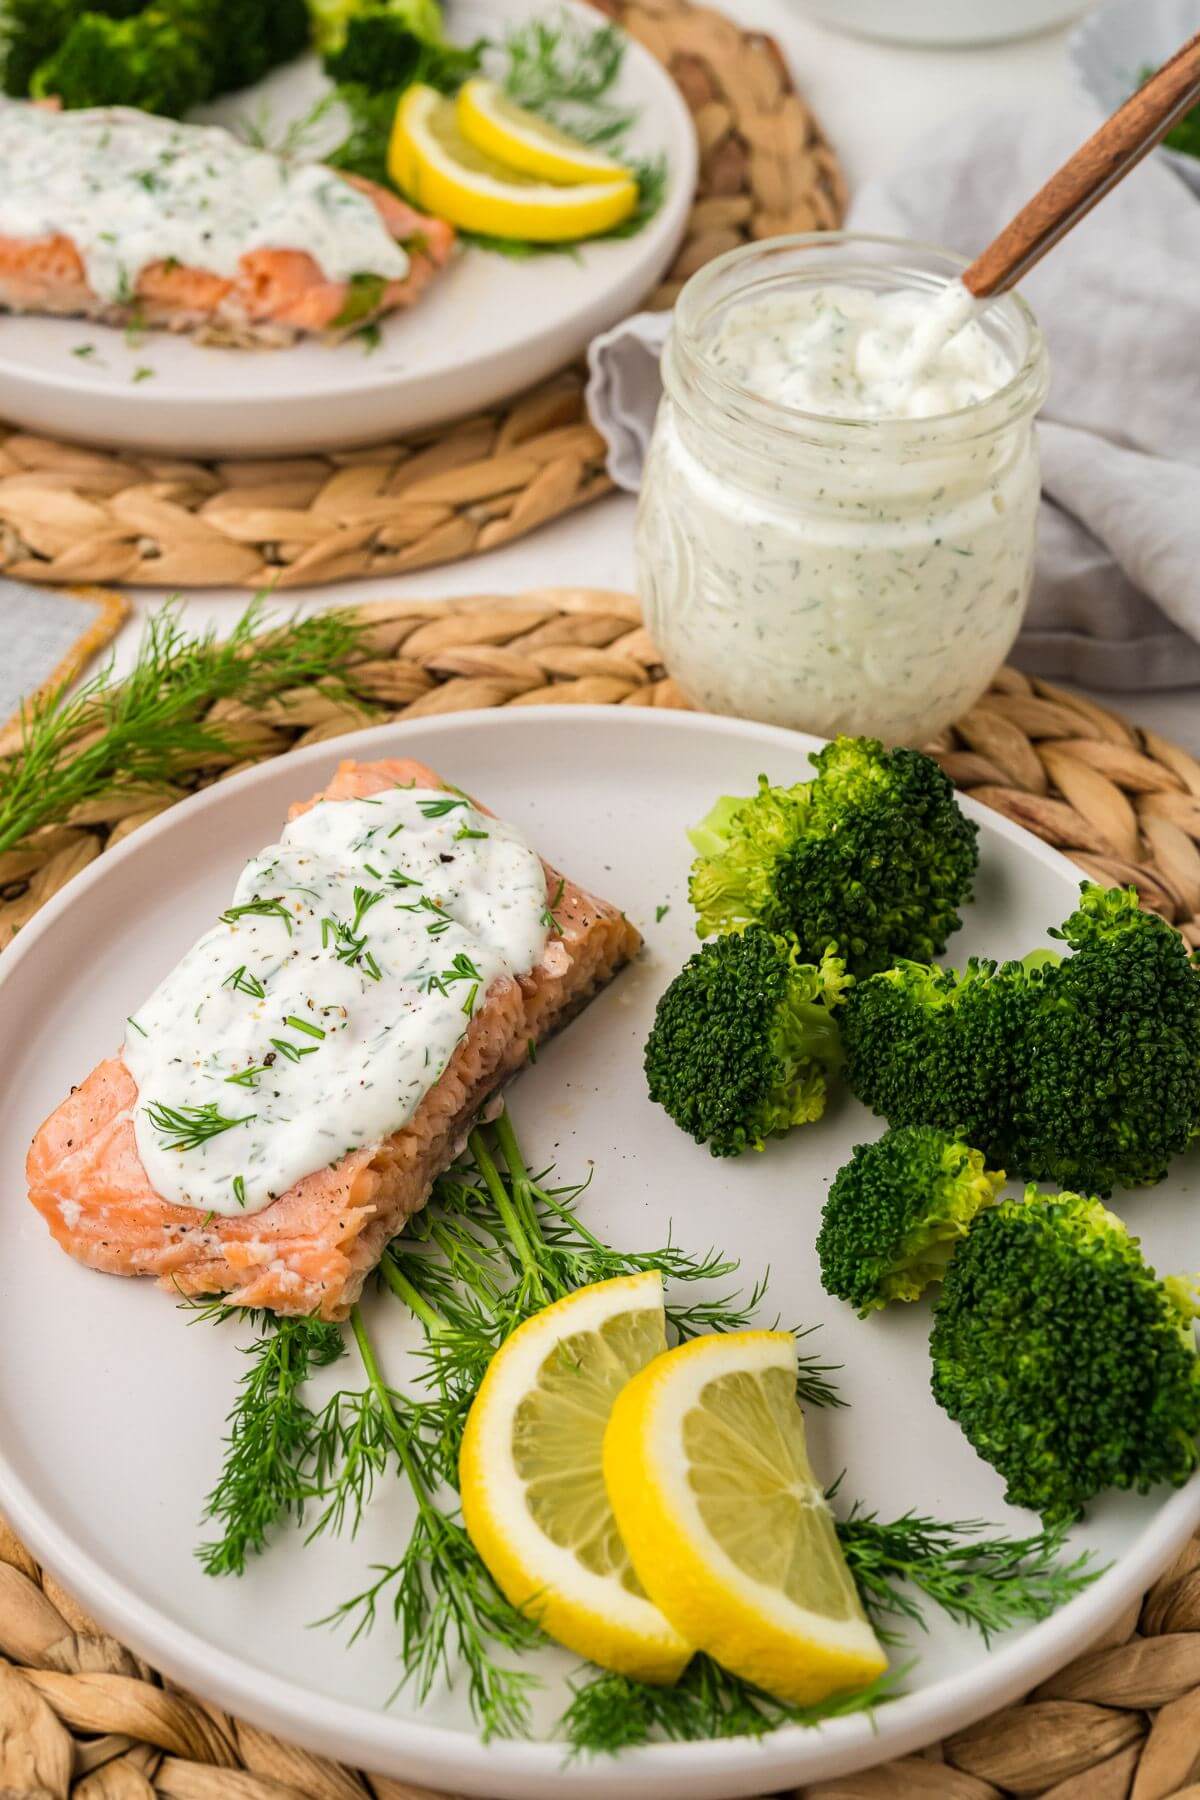 Bright green broccoli and dill contrast with bright yellow lemons and pink salmon on white plates.